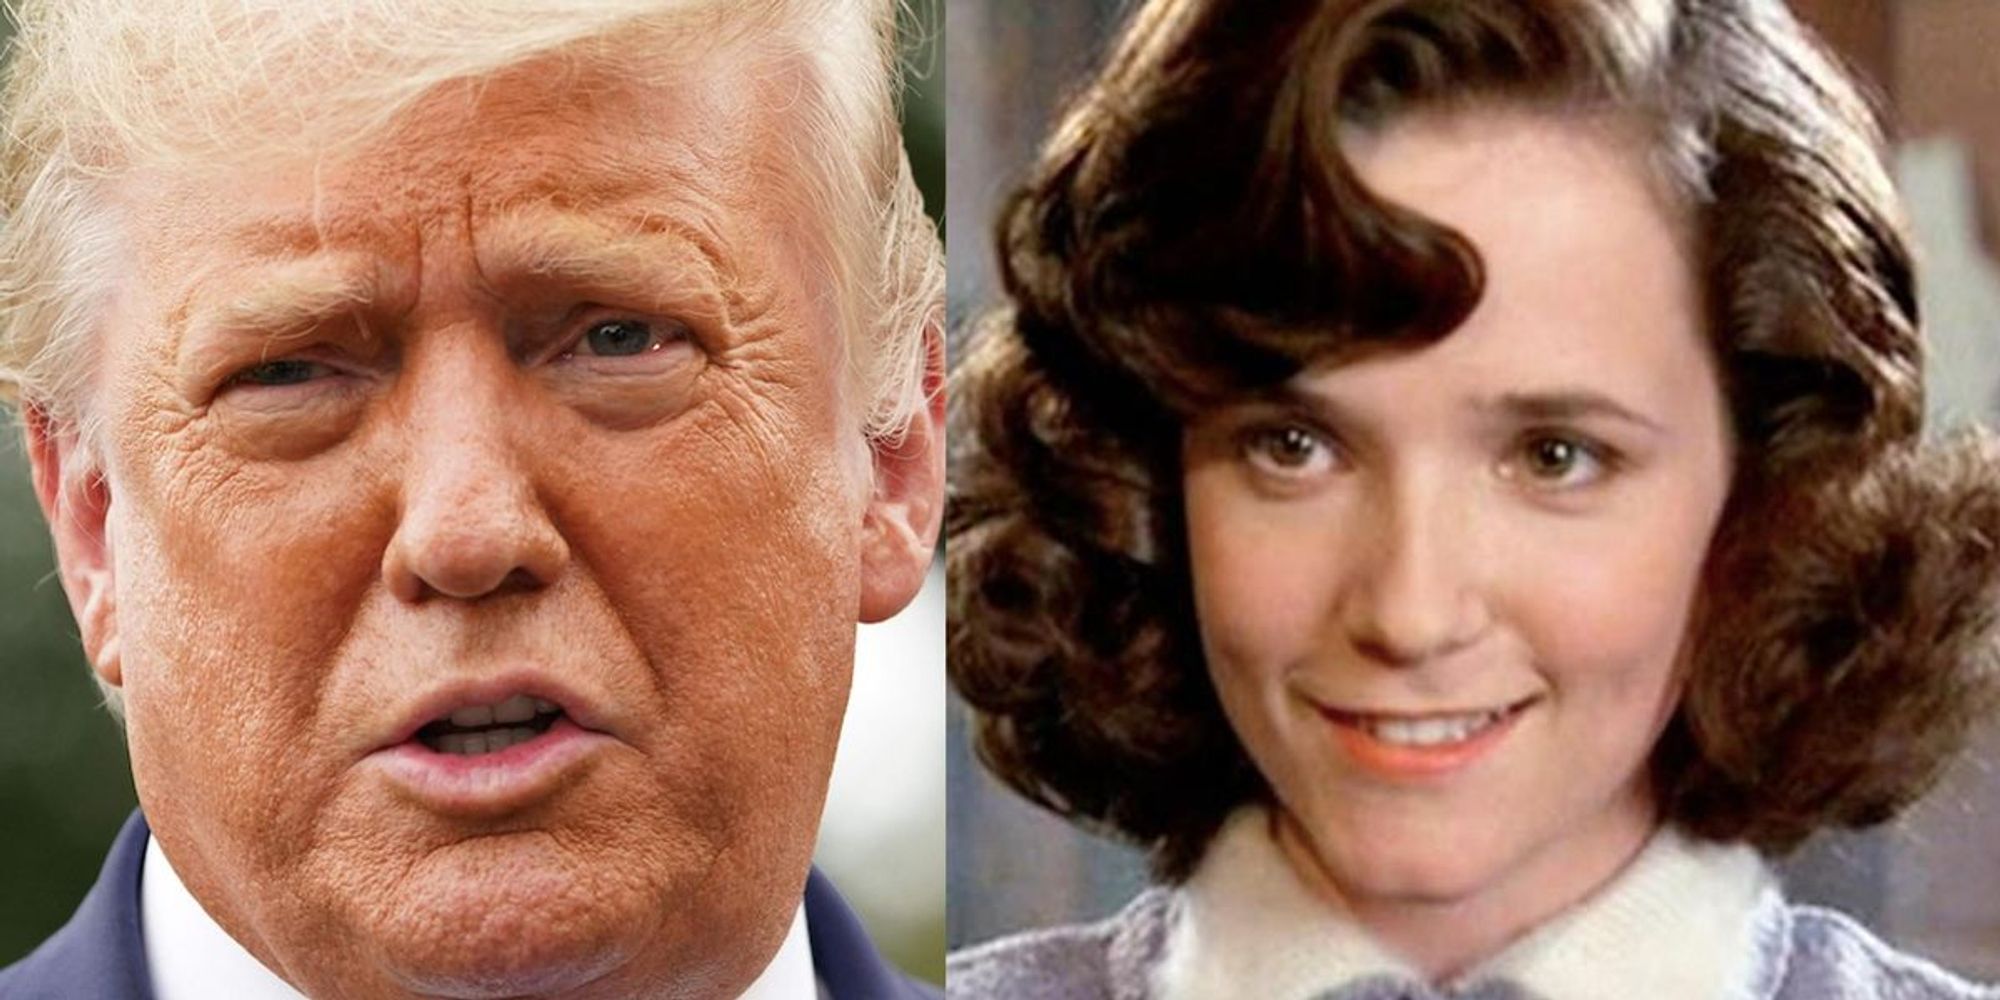 Lea Thompson’s hilarious reaction to Trump’s prop from ‘Back to the Future”